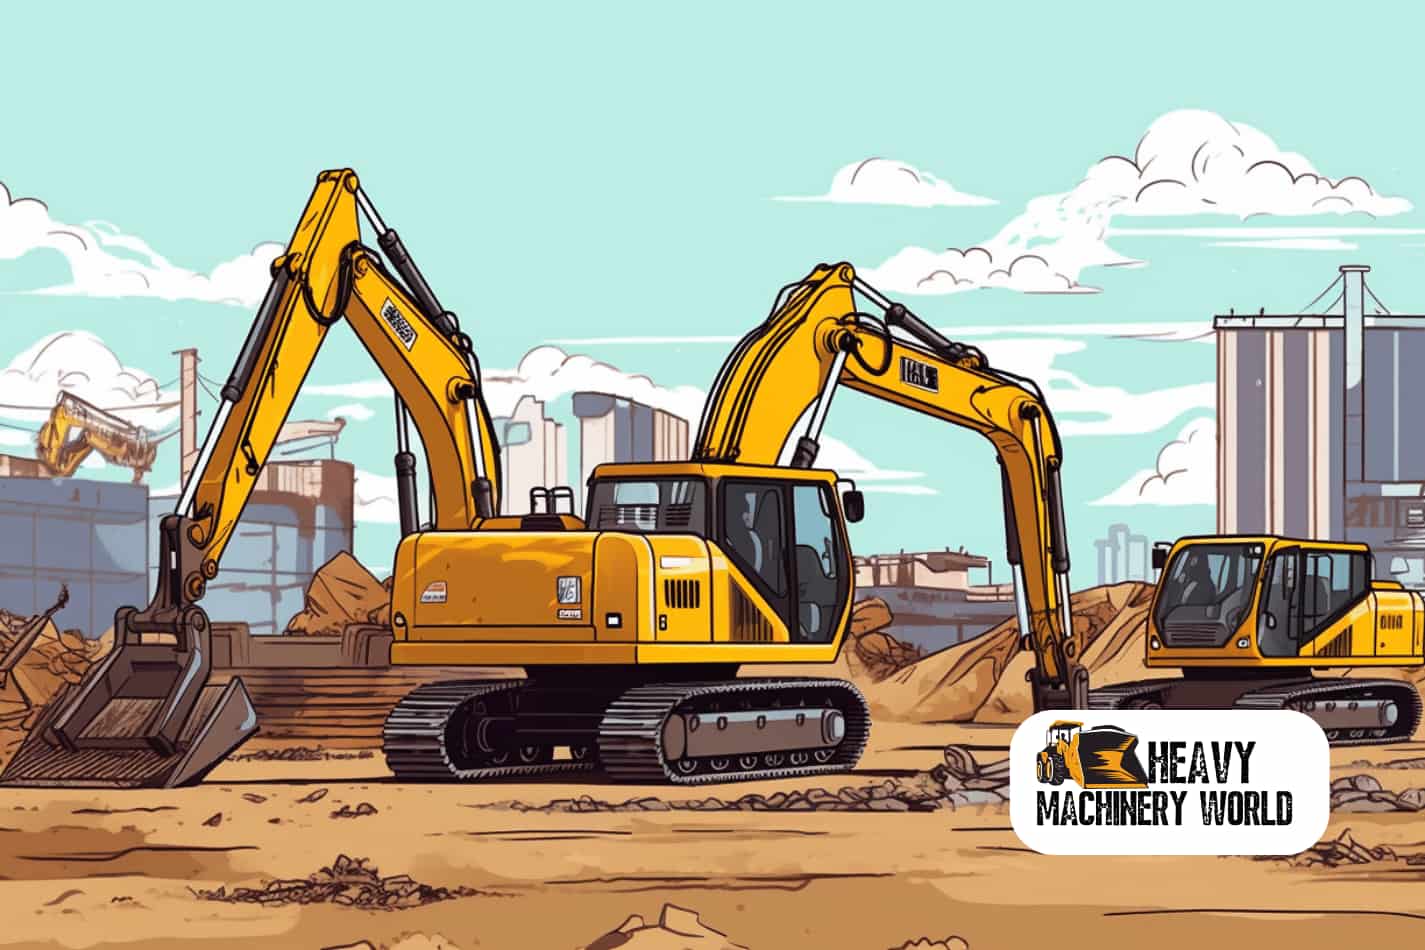 15 Things to Consider When Renting Heavy Equipment